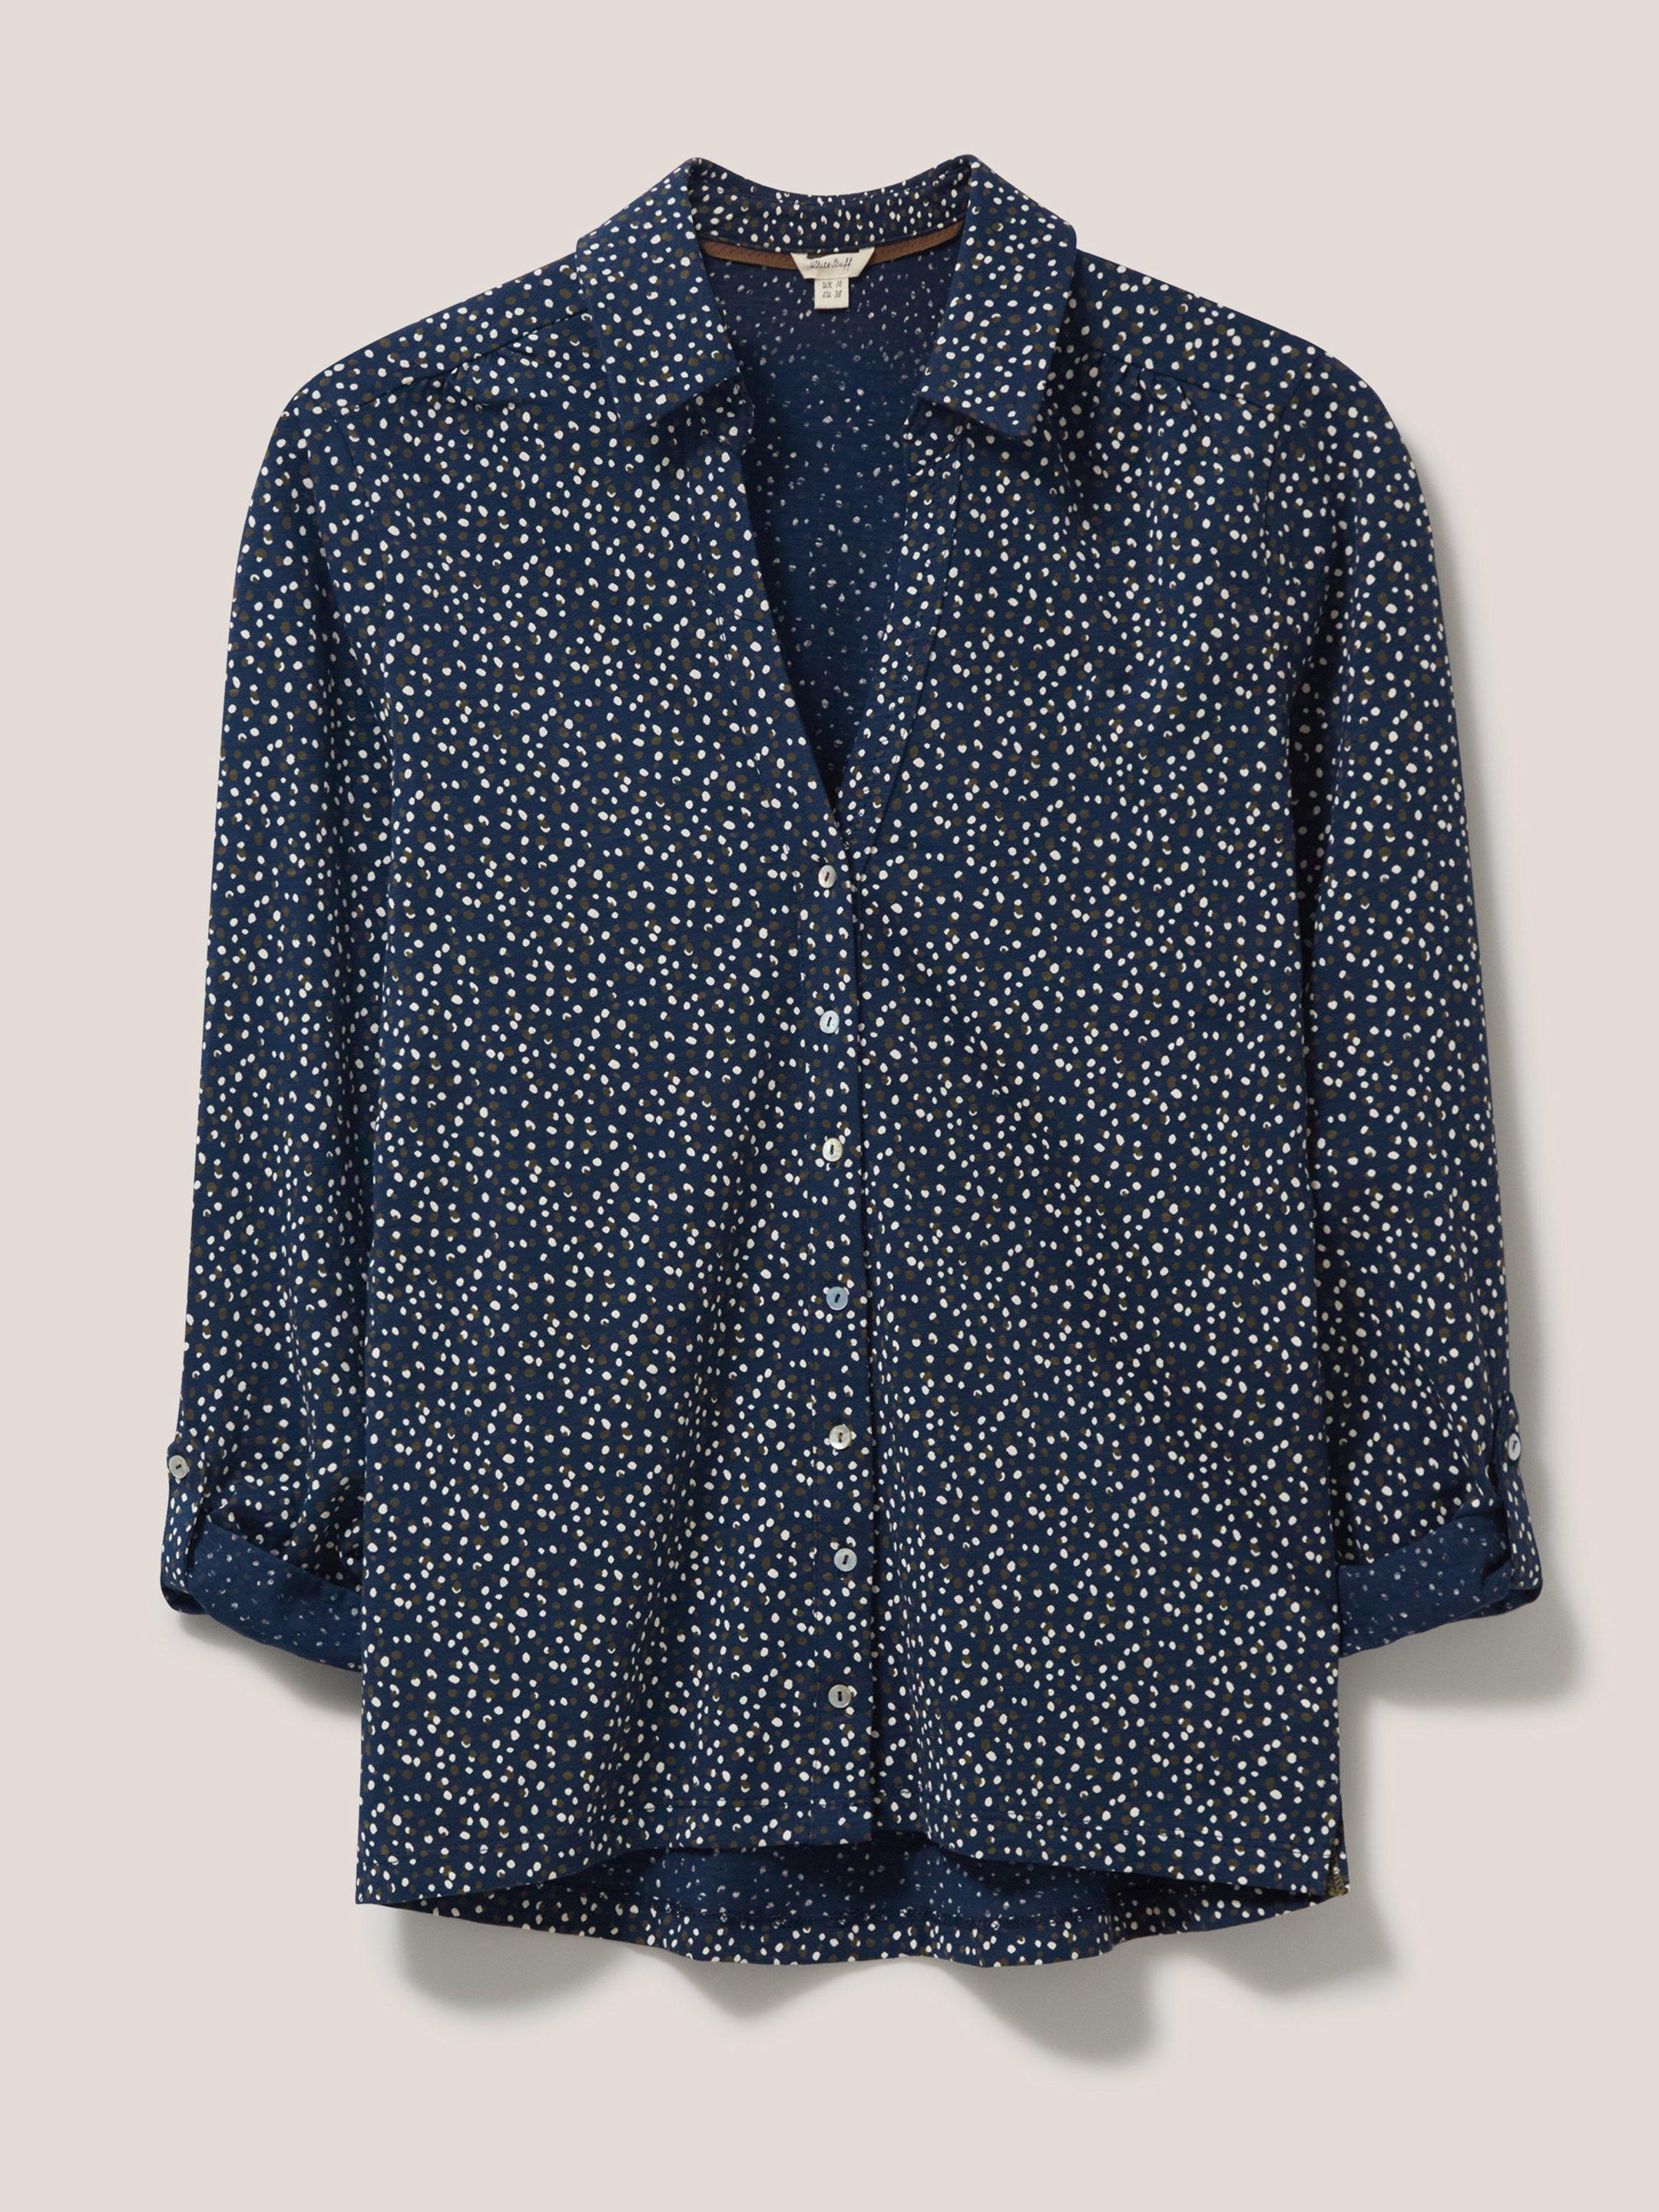 Annie Printed Jersey Shirt in NAVY MULTI - FLAT FRONT